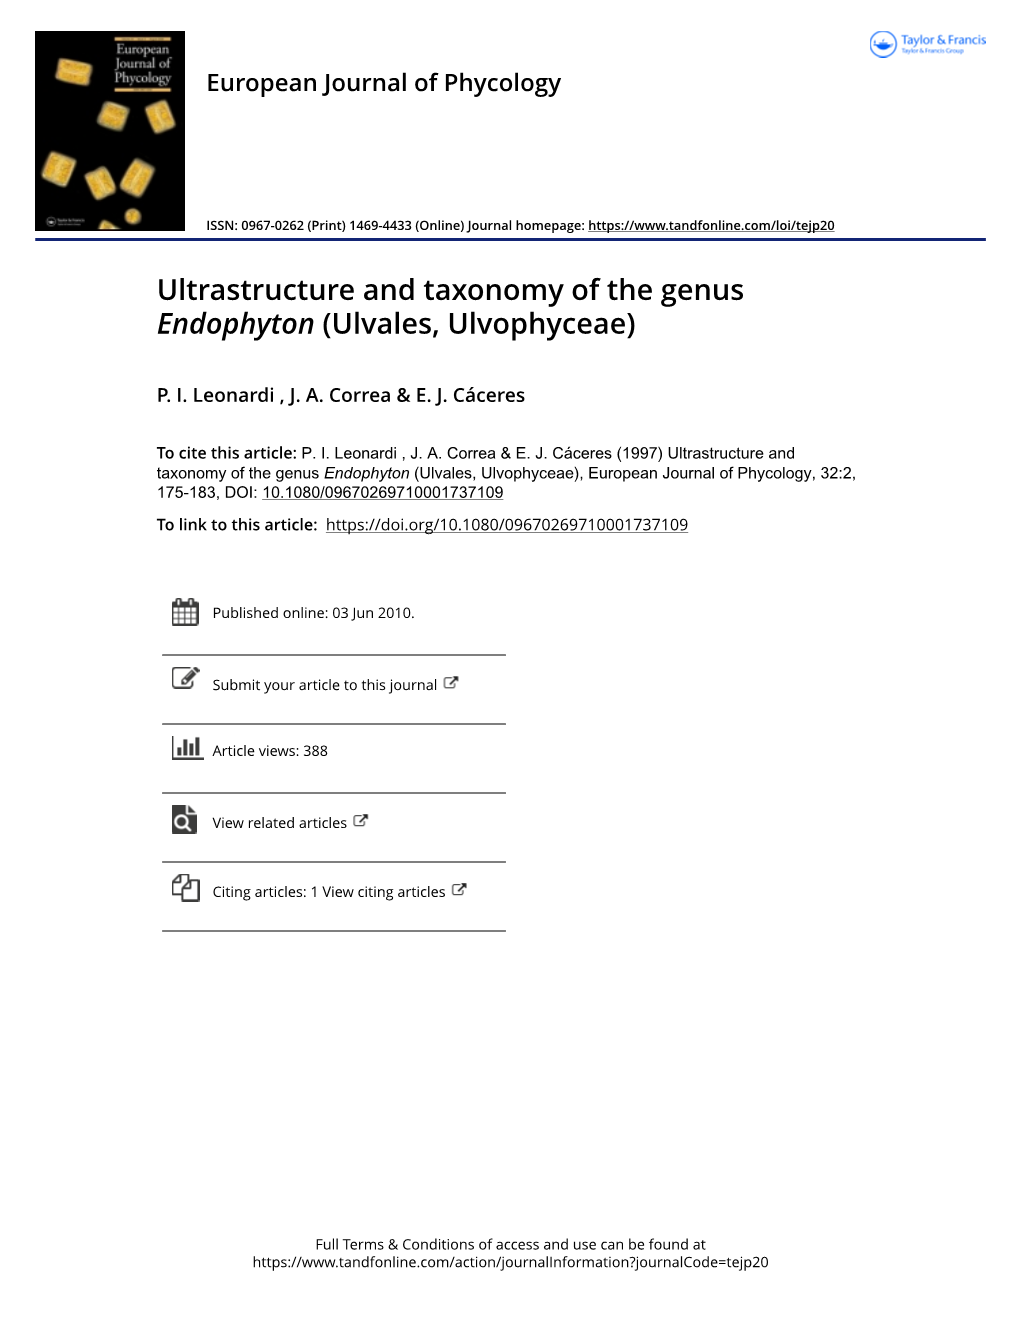 Ultrastructure and Taxonomy of the Genus Endophyton (Ulvales, Ulvophyceae)